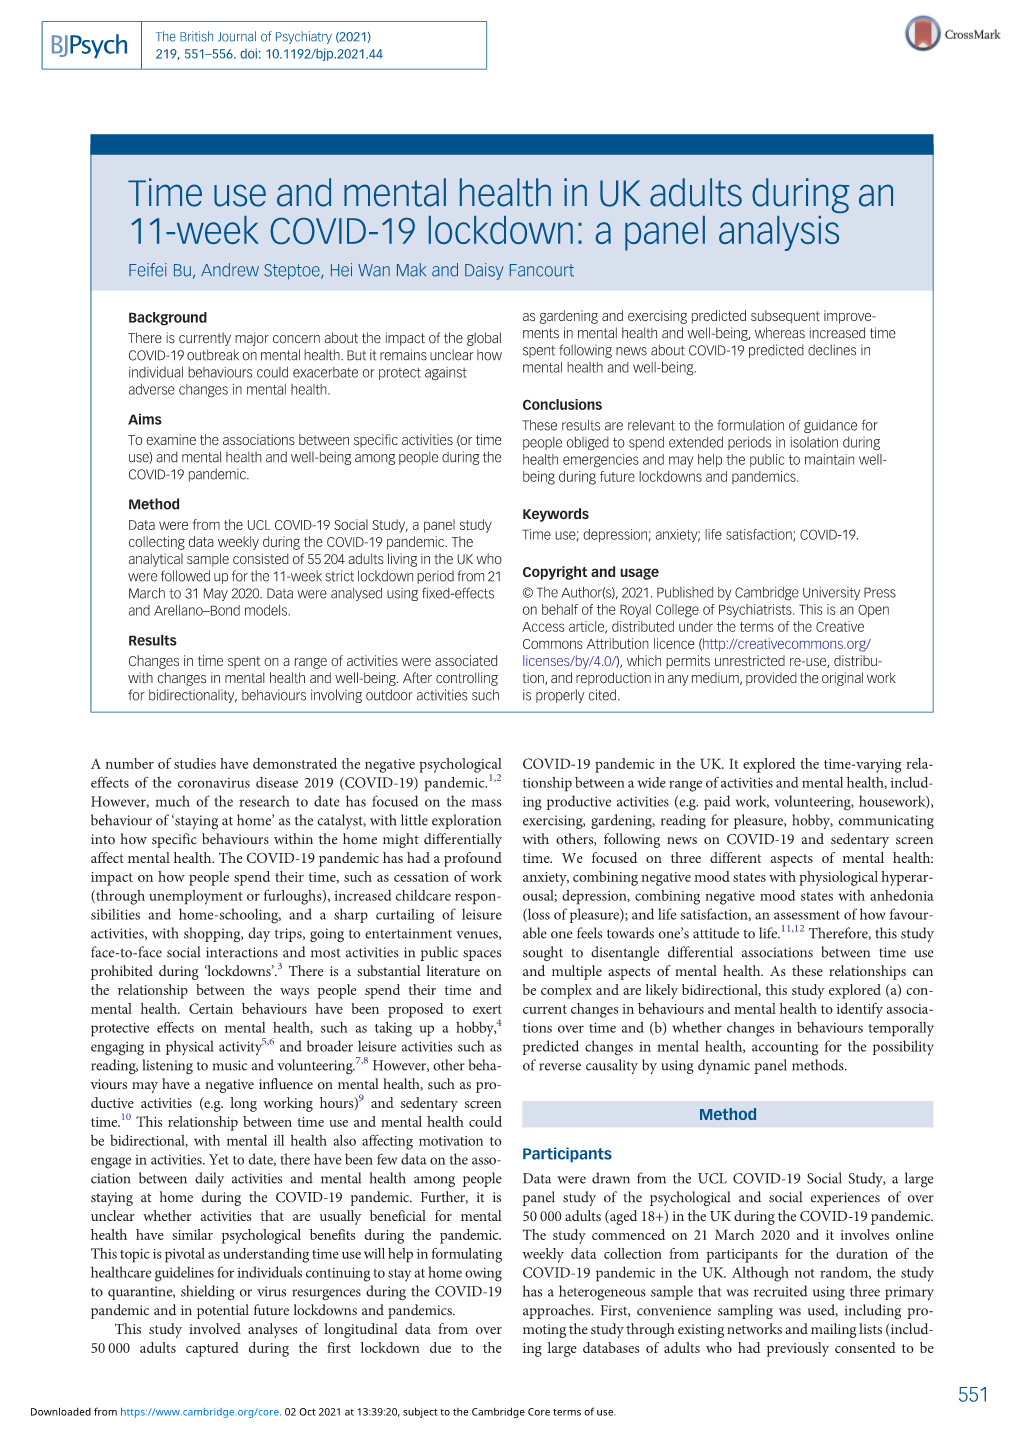 Time Use and Mental Health in UK Adults During an 11-Week COVID-19 Lockdown: a Panel Analysis Feifei Bu, Andrew Steptoe, Hei Wan Mak and Daisy Fancourt